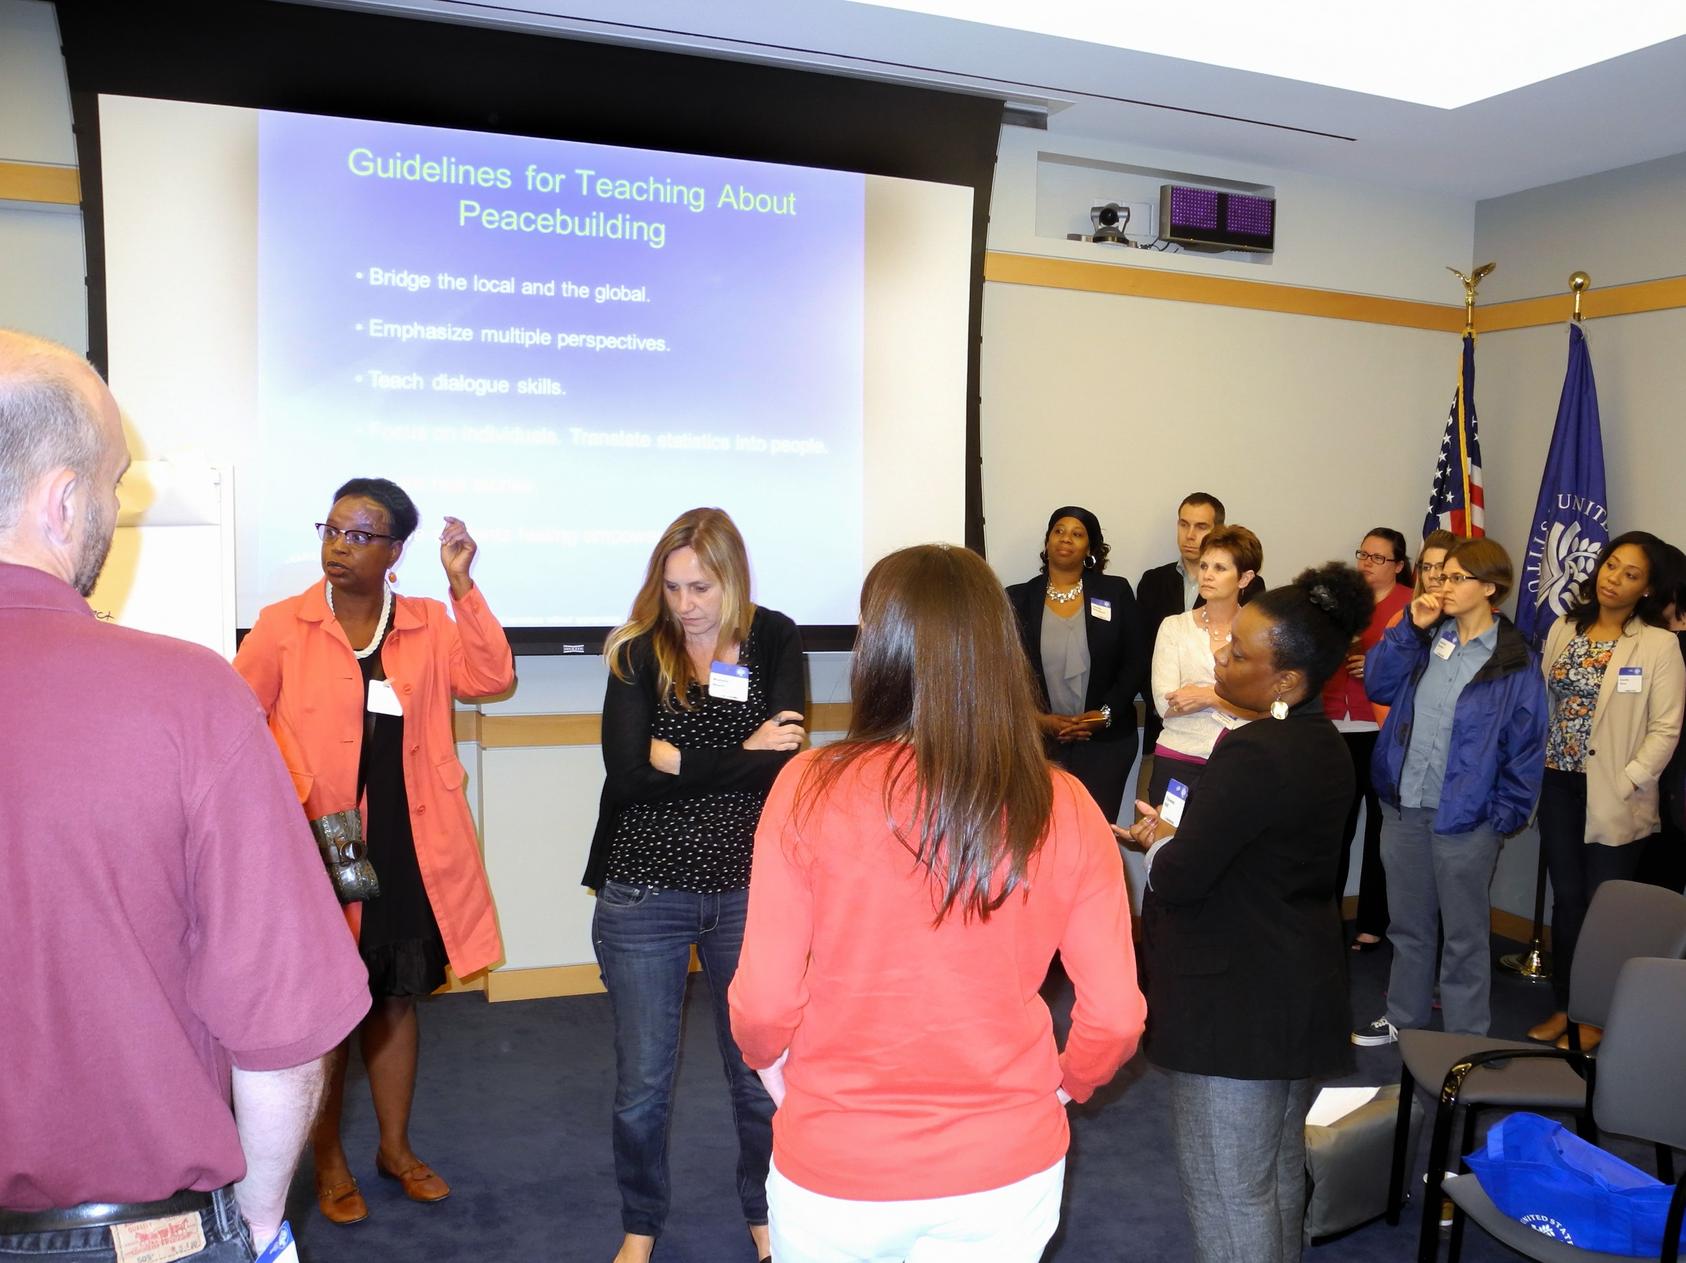 International Baccalaureate teachers learn best practices for teaching global peacebuilding during a teacher workshop at the U.S. Institute of Peace.